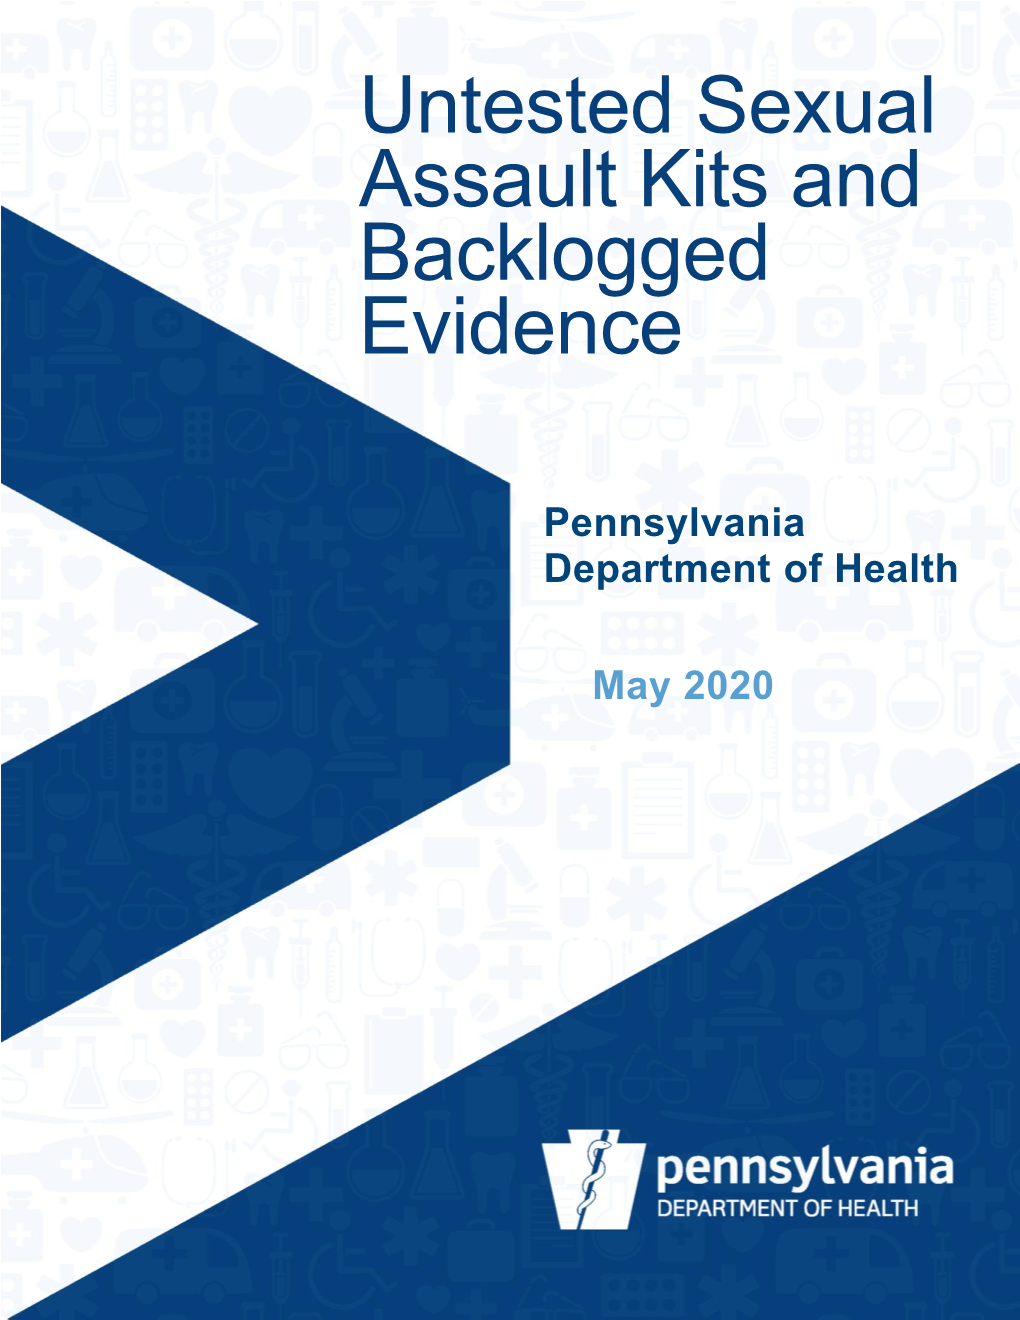 2020 Untested Sexual Assault Kits and Backlogged Evidence Report